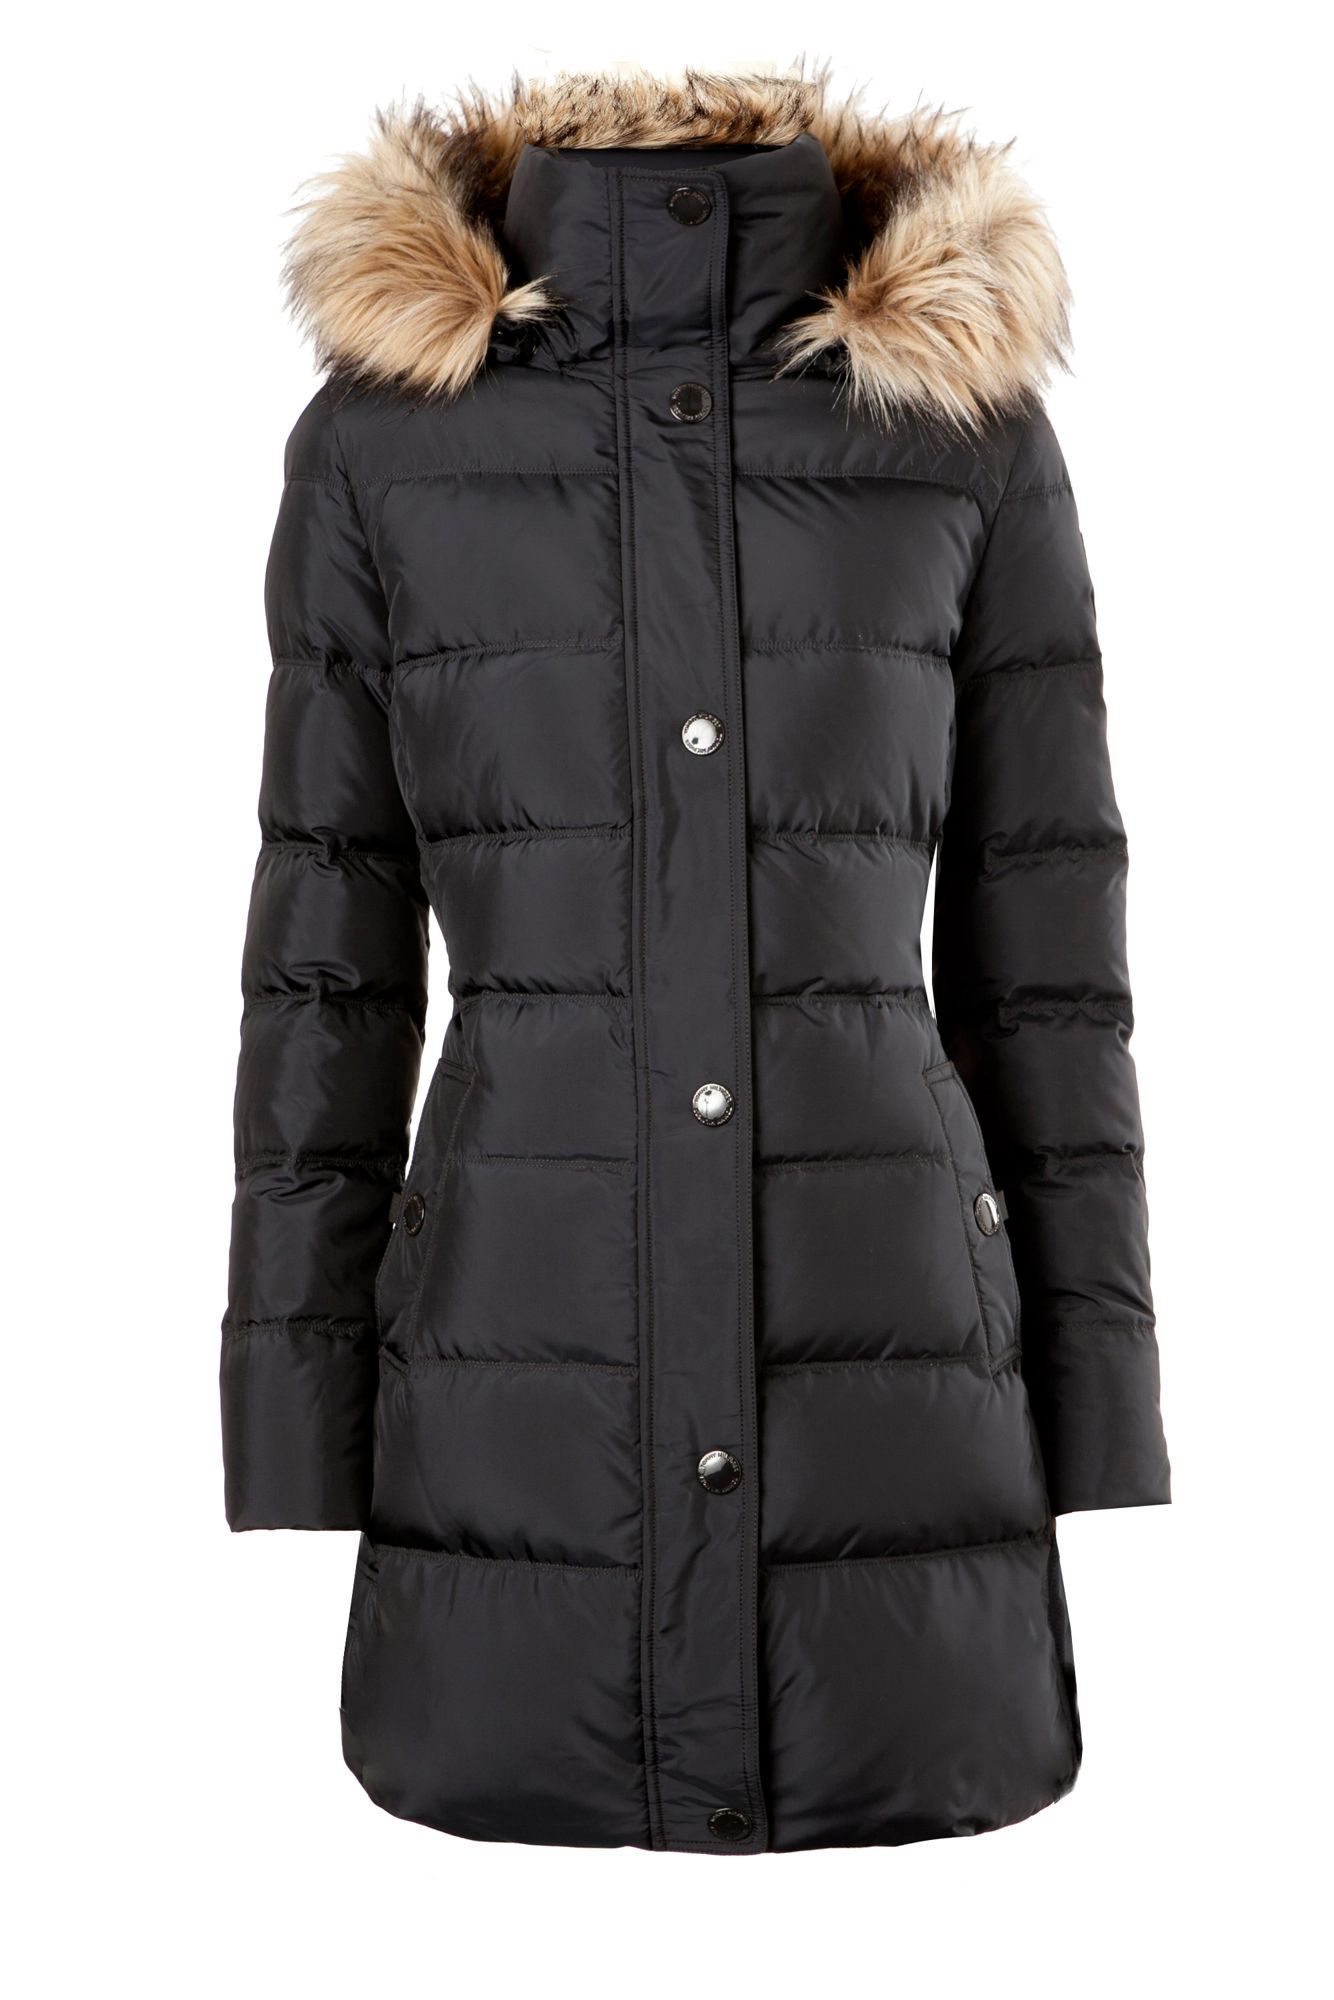 Tommy hilfiger Maine Hooded Coat in Black | Lyst